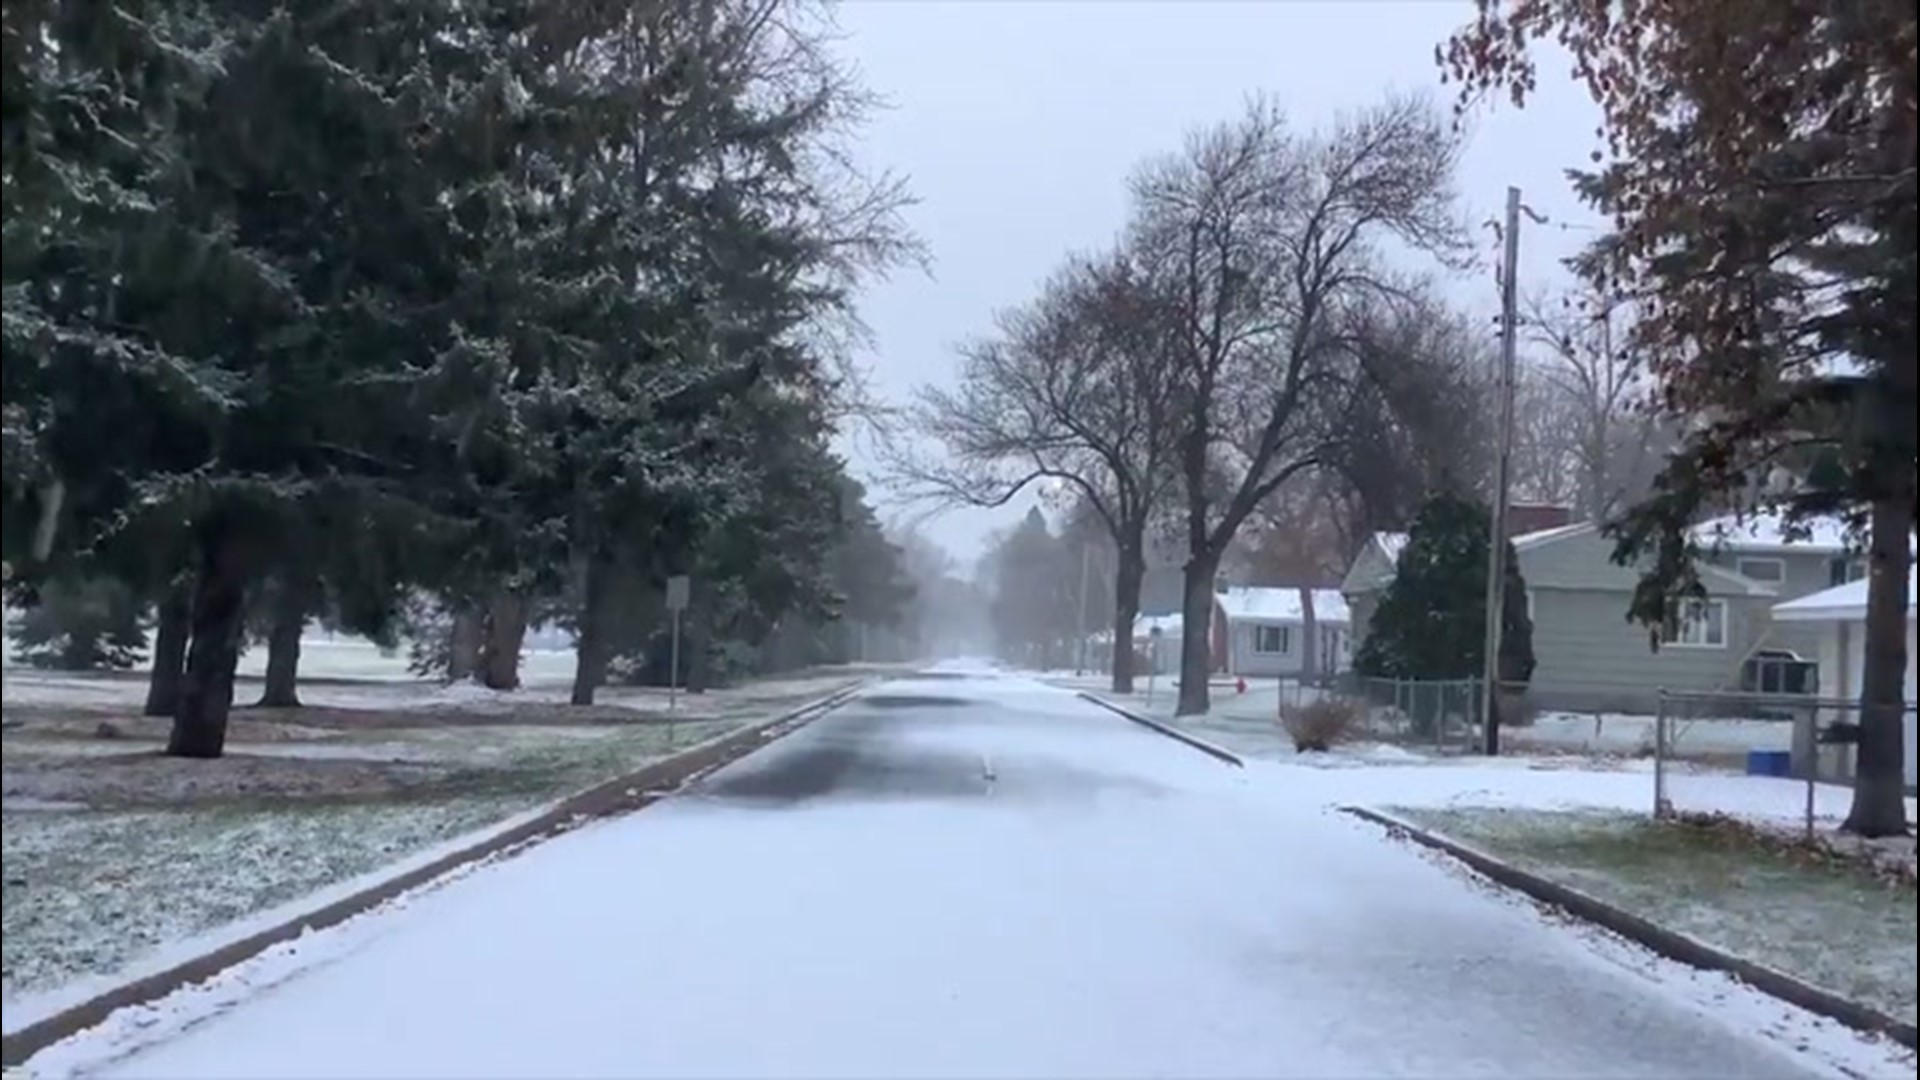 Sunday started off with a light accumulation of snow on the ground in White Bear Lake, Minnesota, on Nov. 22.